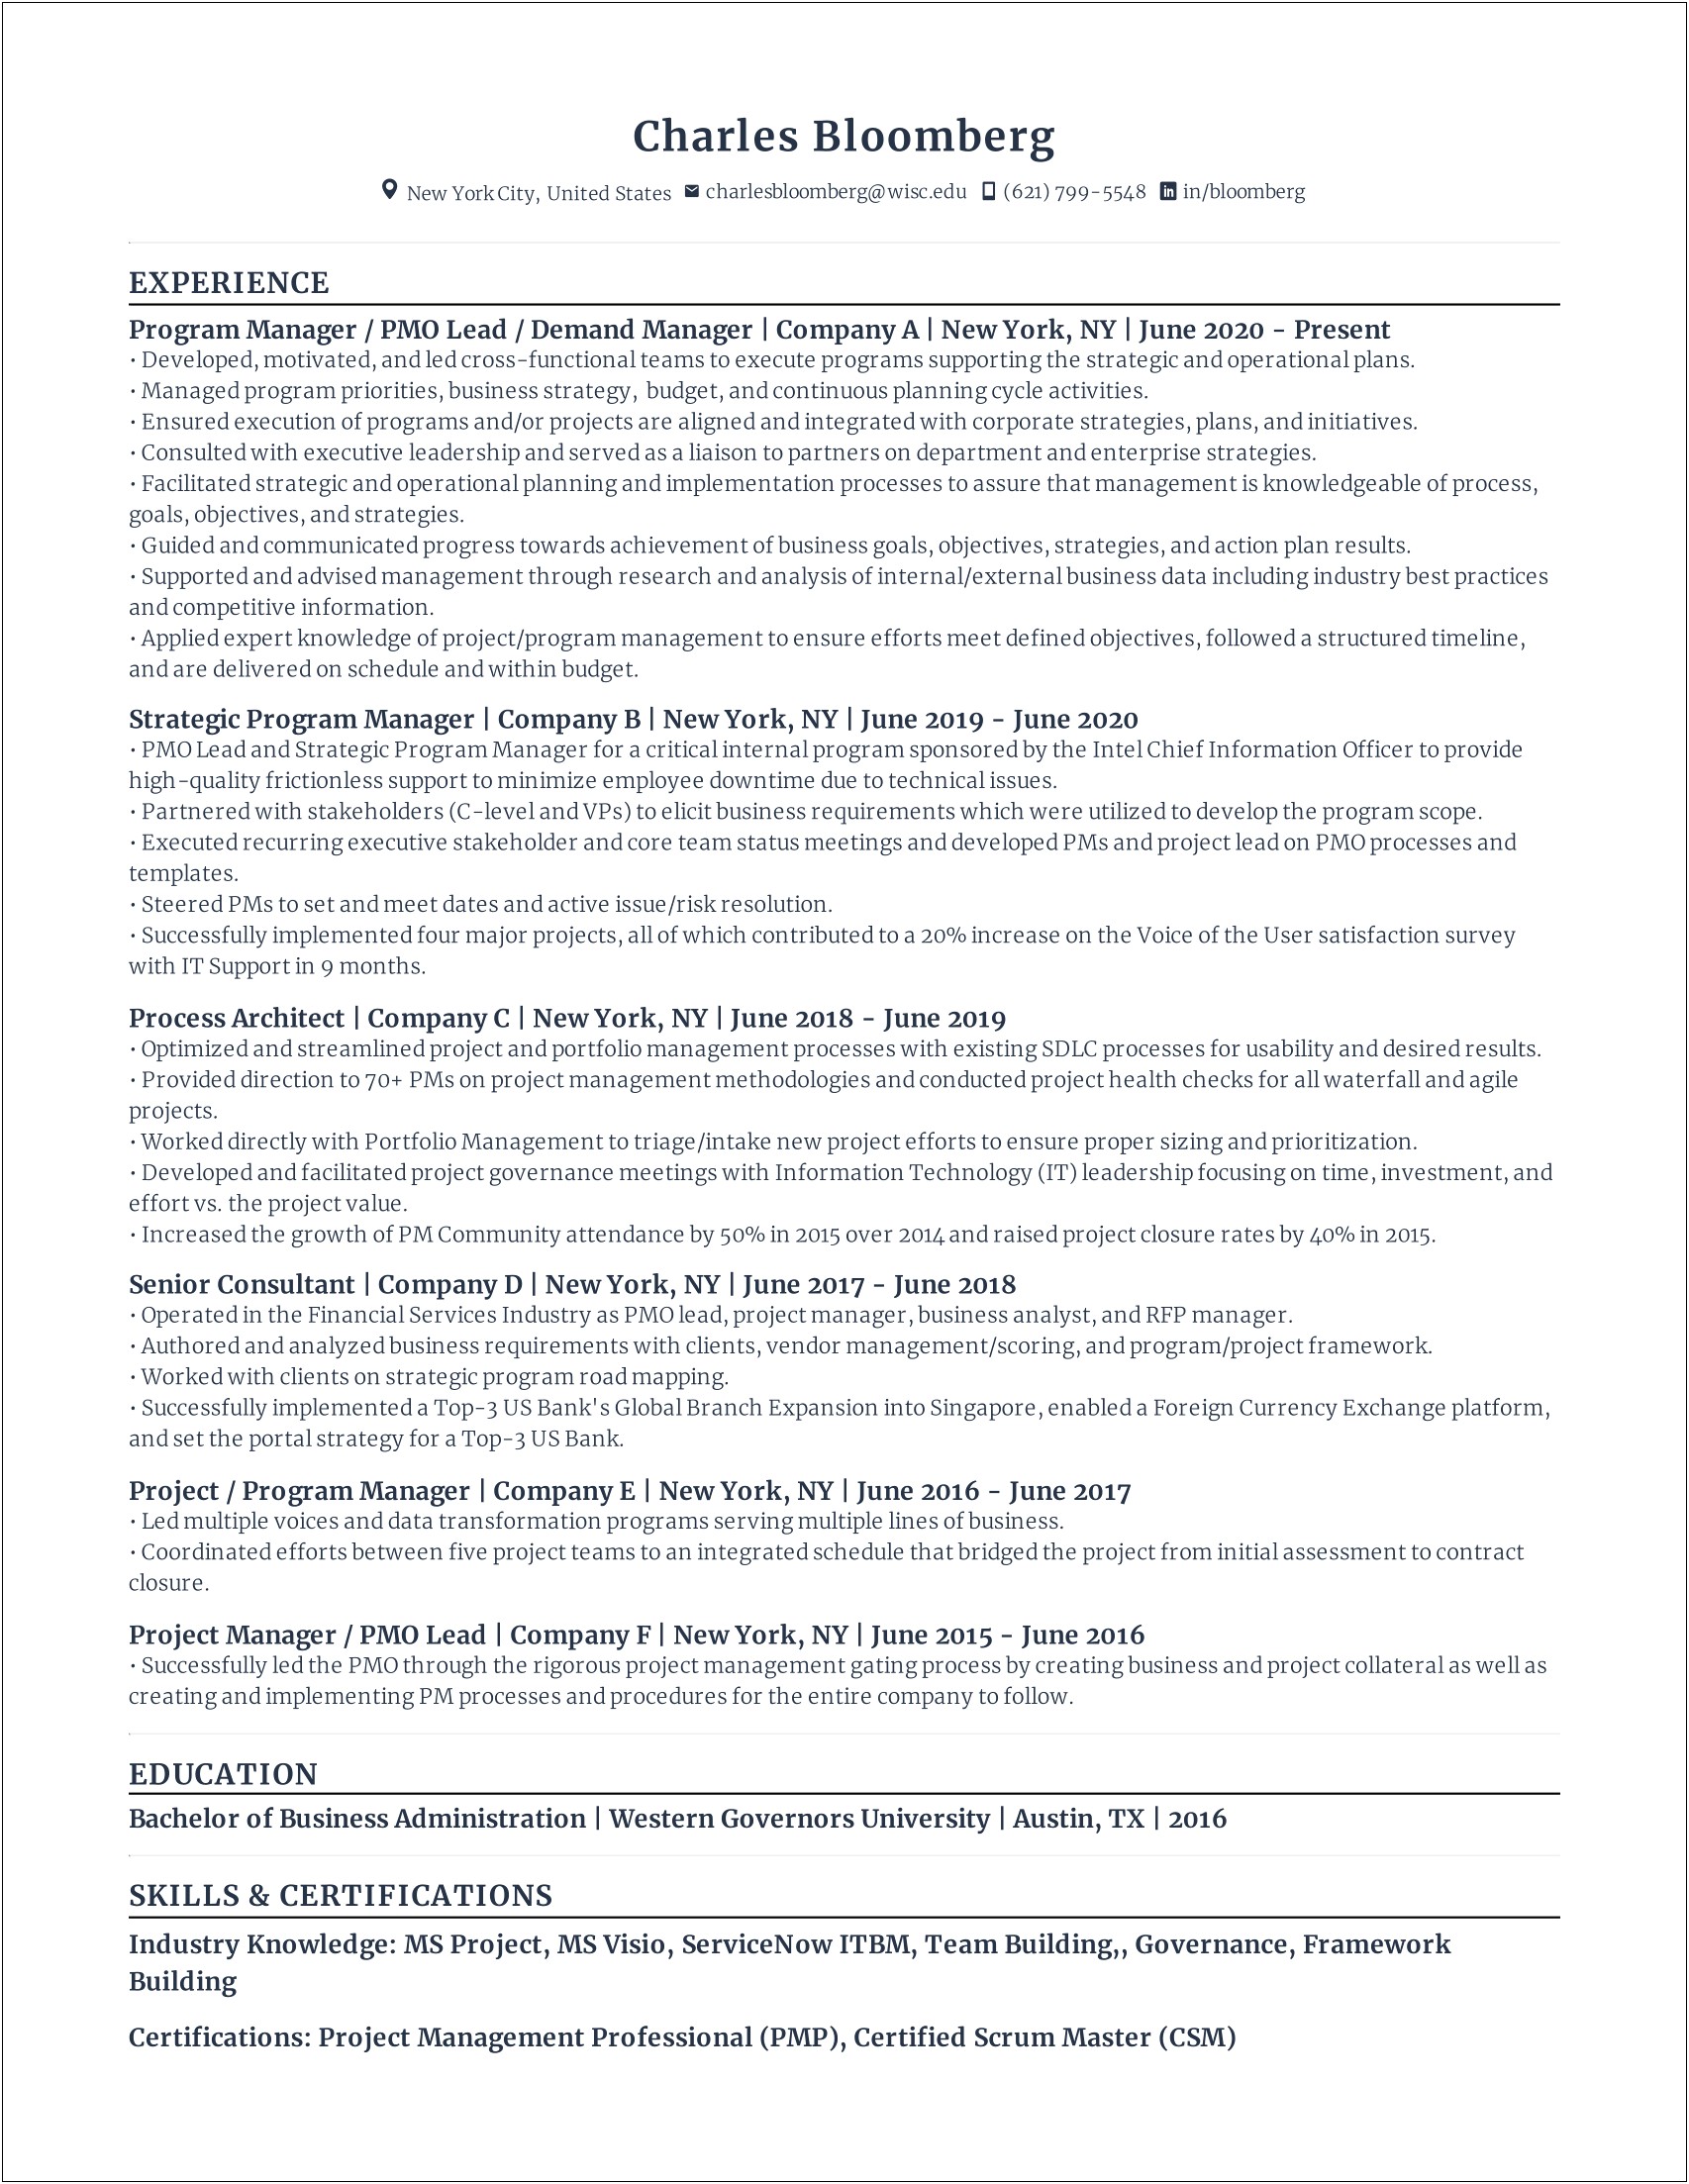 F Job Application Resume In The Unites States